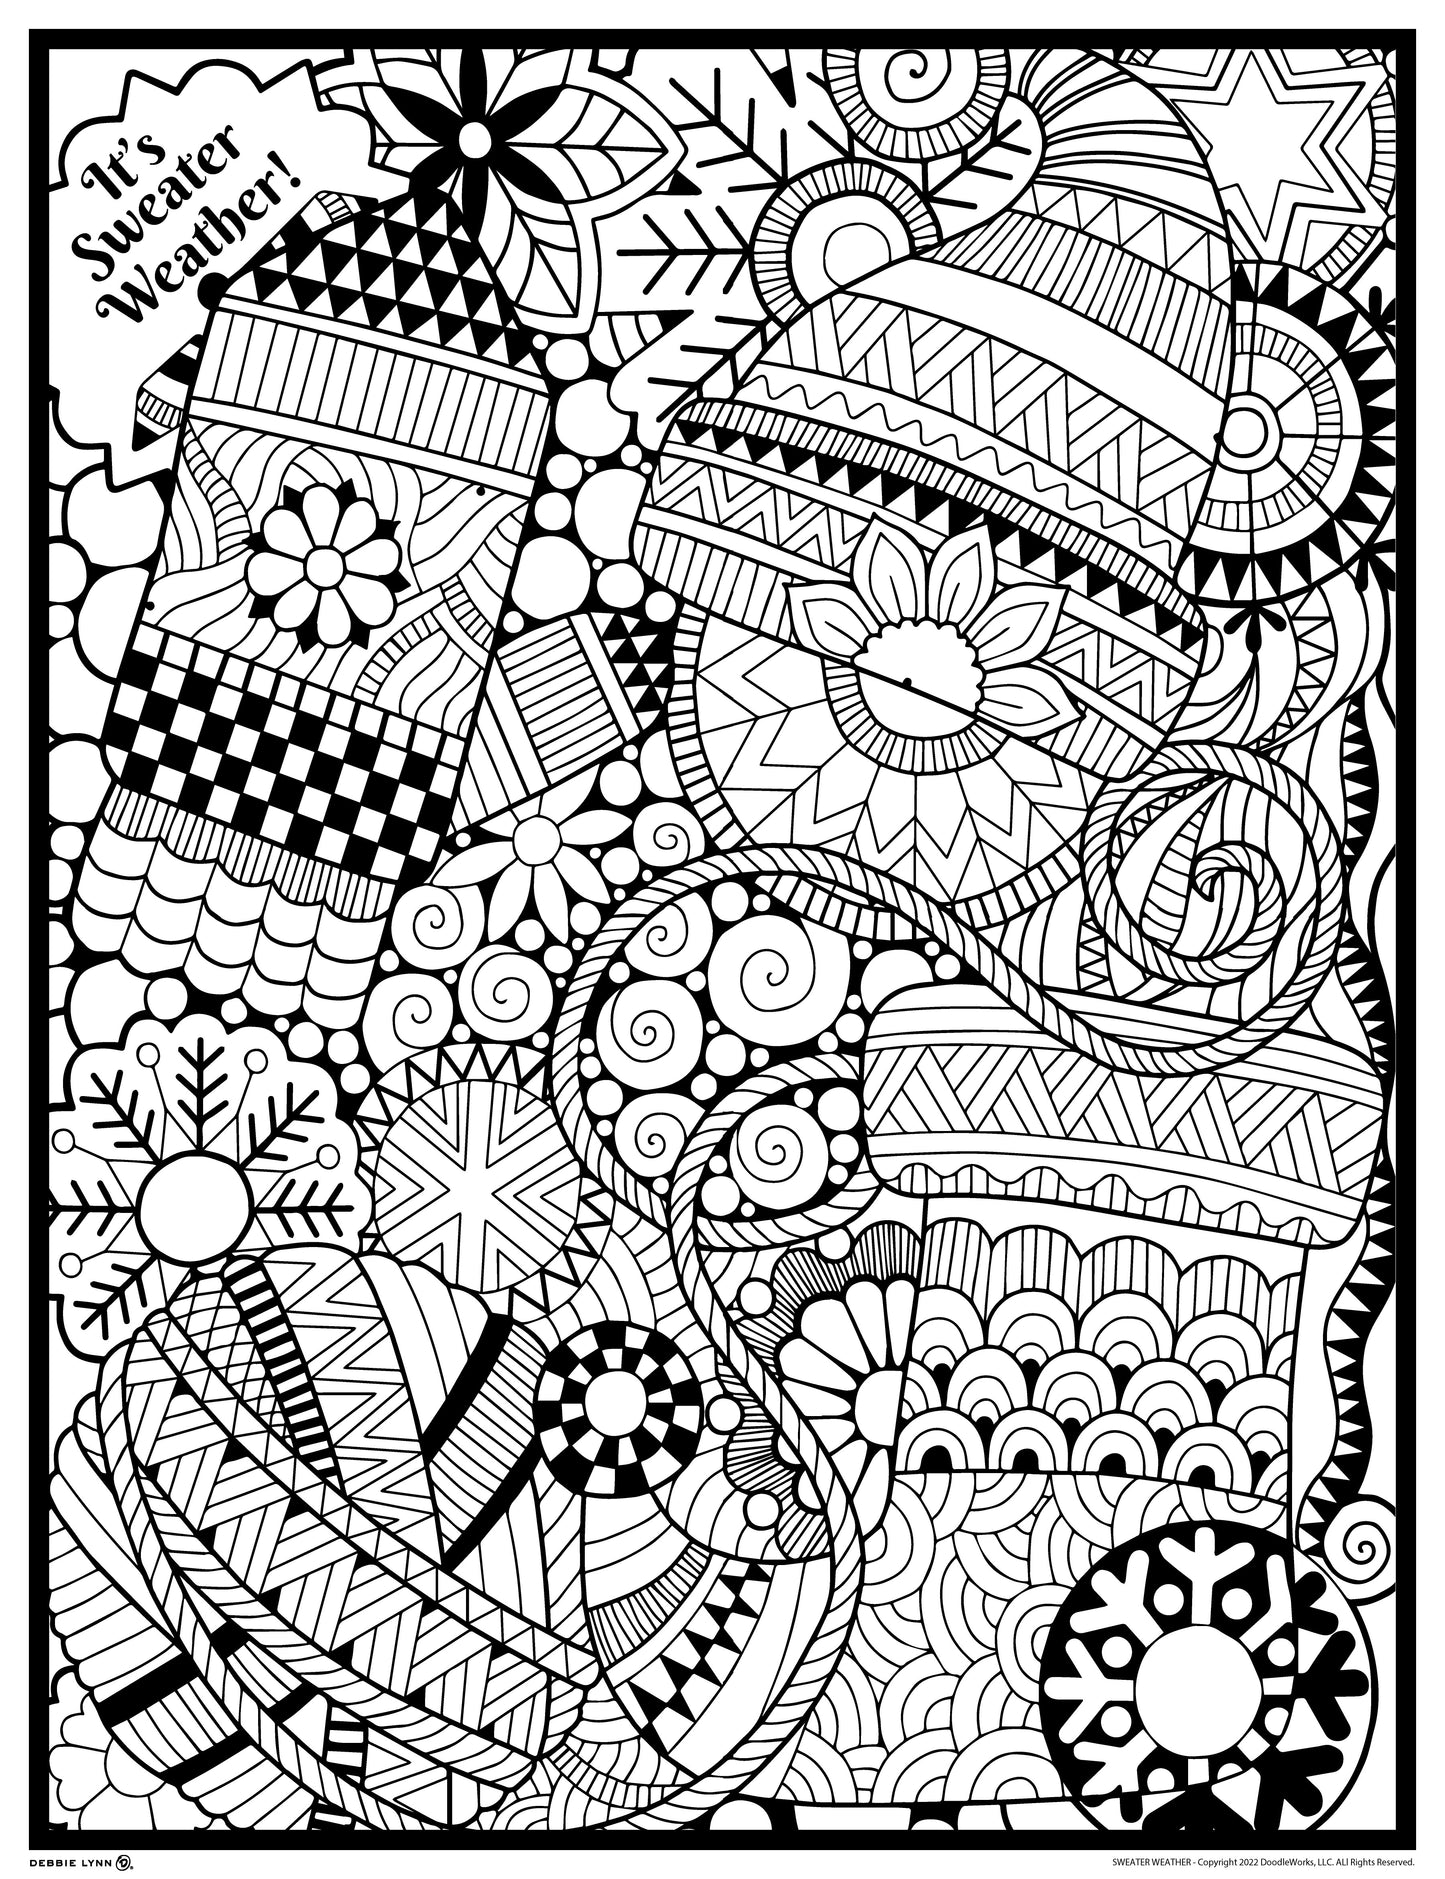 Sweater Weather Personalized Giant Coloring Poster 46"x60"